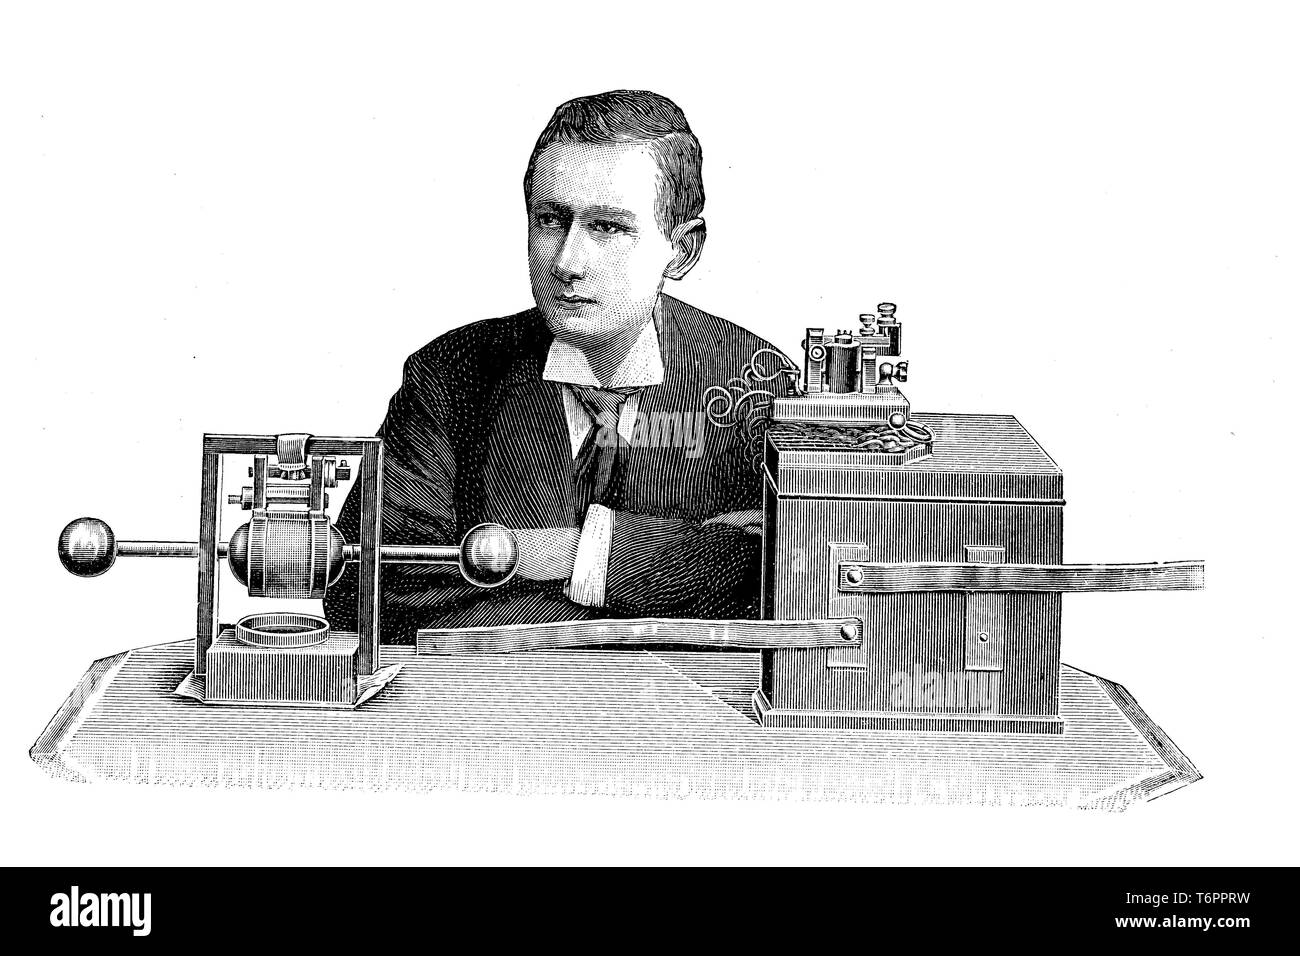 Guglielmo Marconi demonstrating apparatus he used in his first long  distance radio transmissions in the 1890, historical illustration, Italy  Stock Photo - Alamy